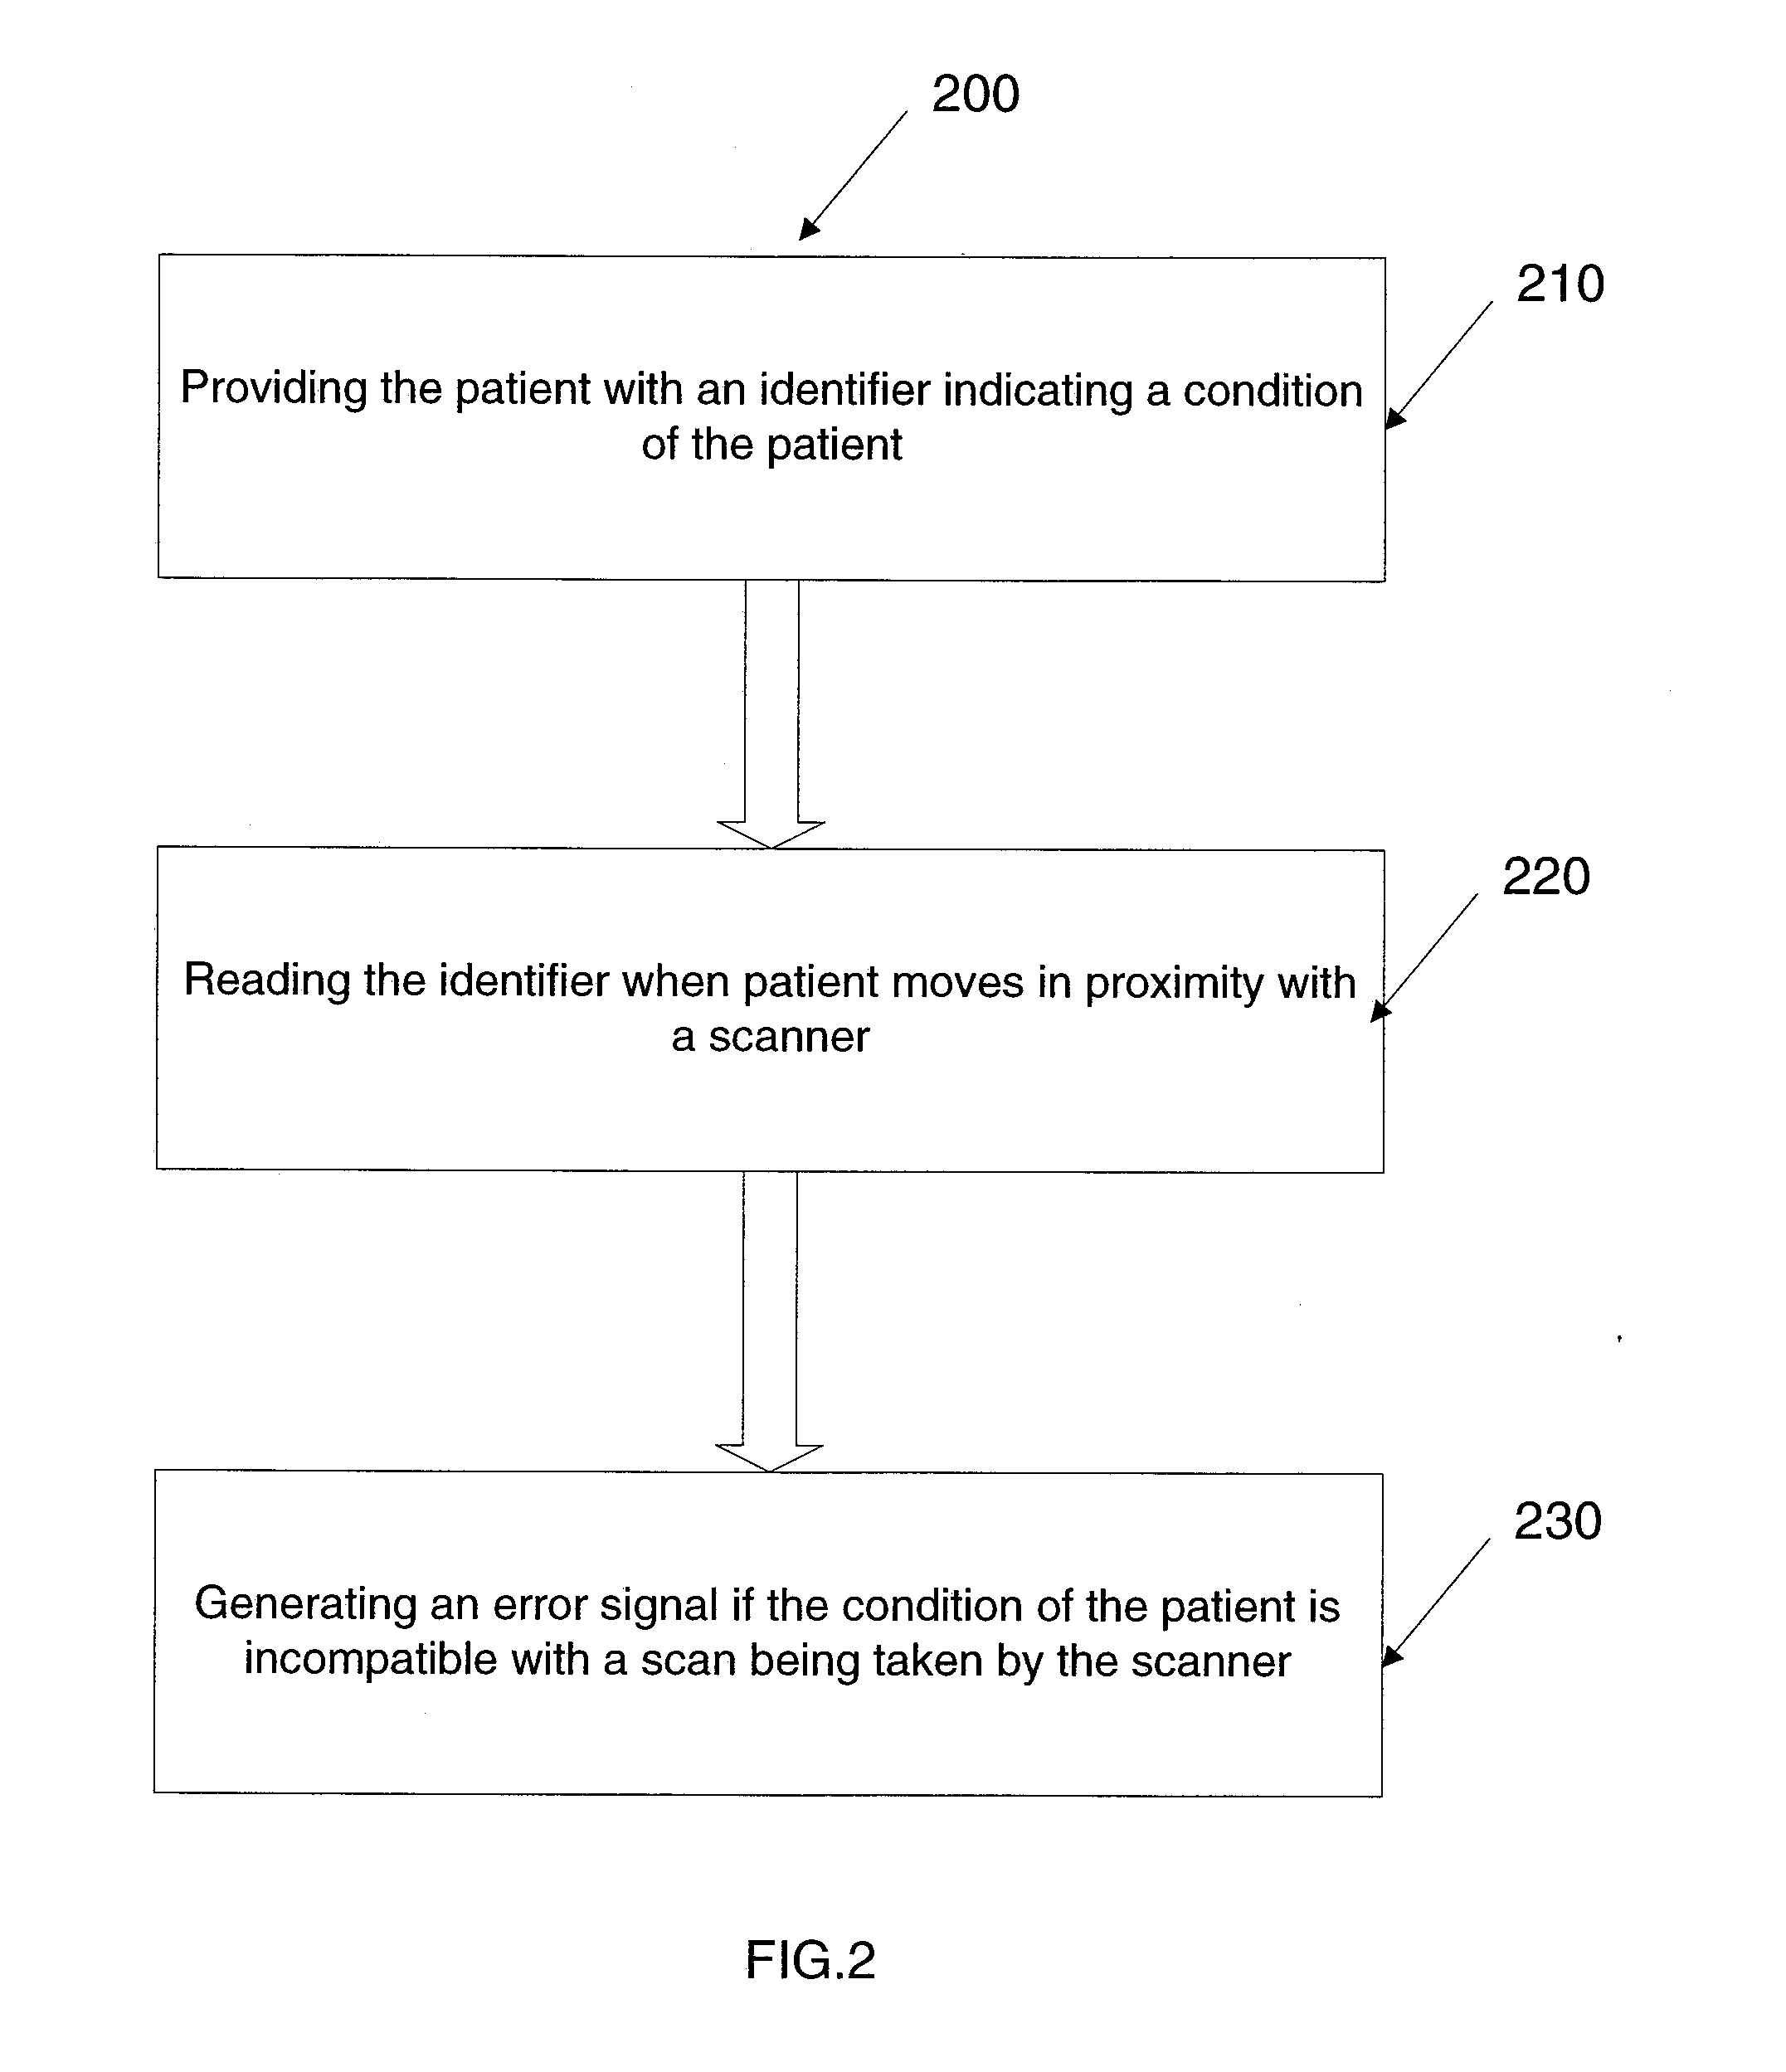 Method and system for facilitating error free scan administration